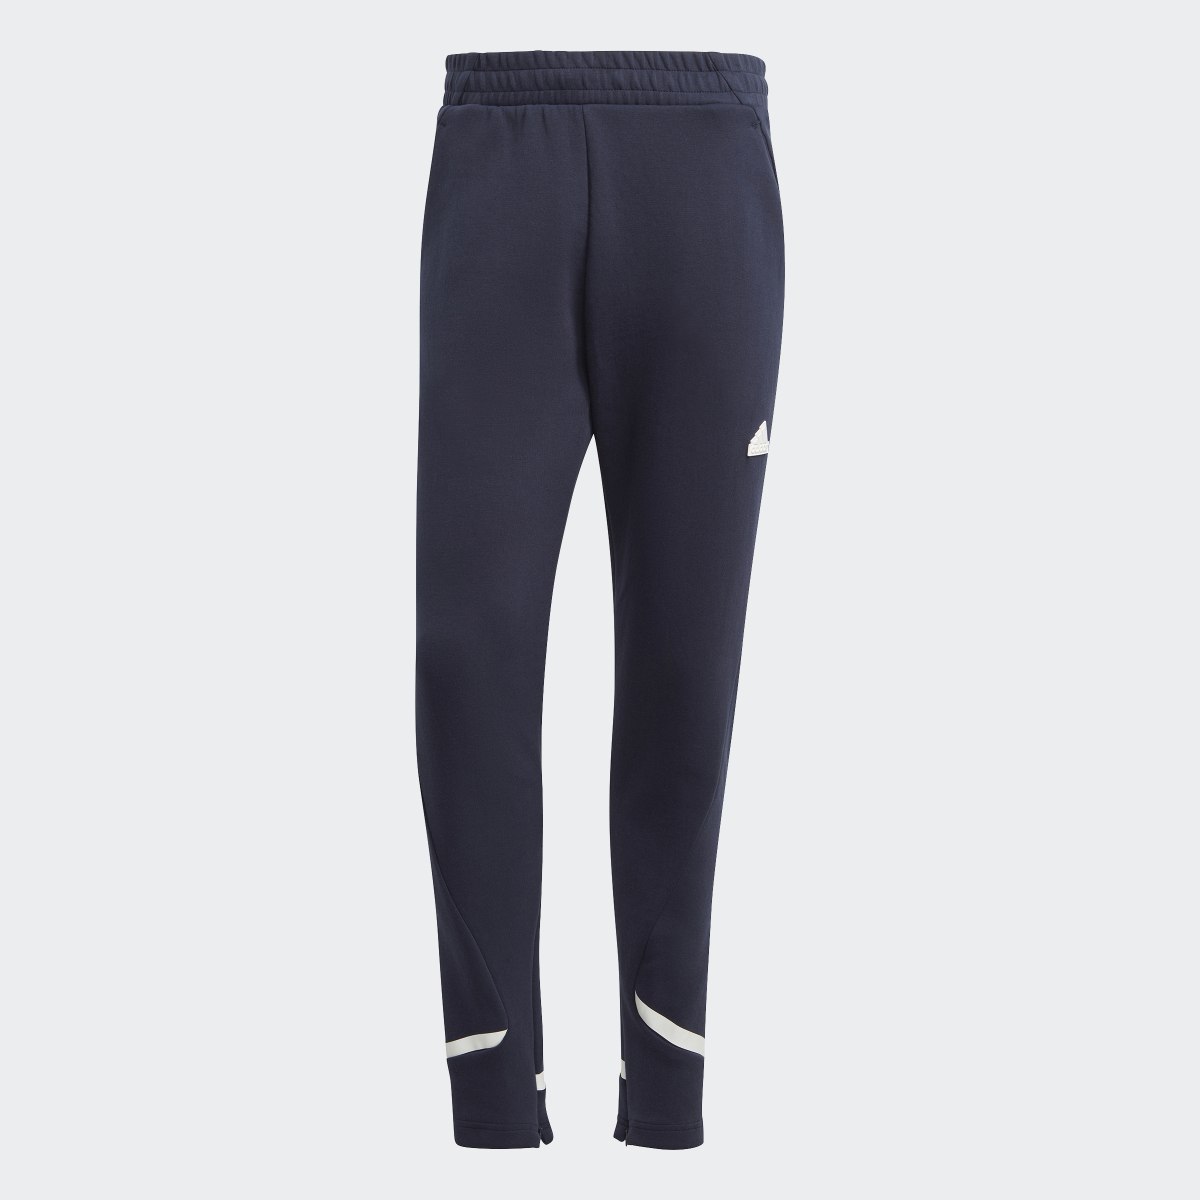 Adidas Designed for Gameday Tracksuit Bottoms. 4